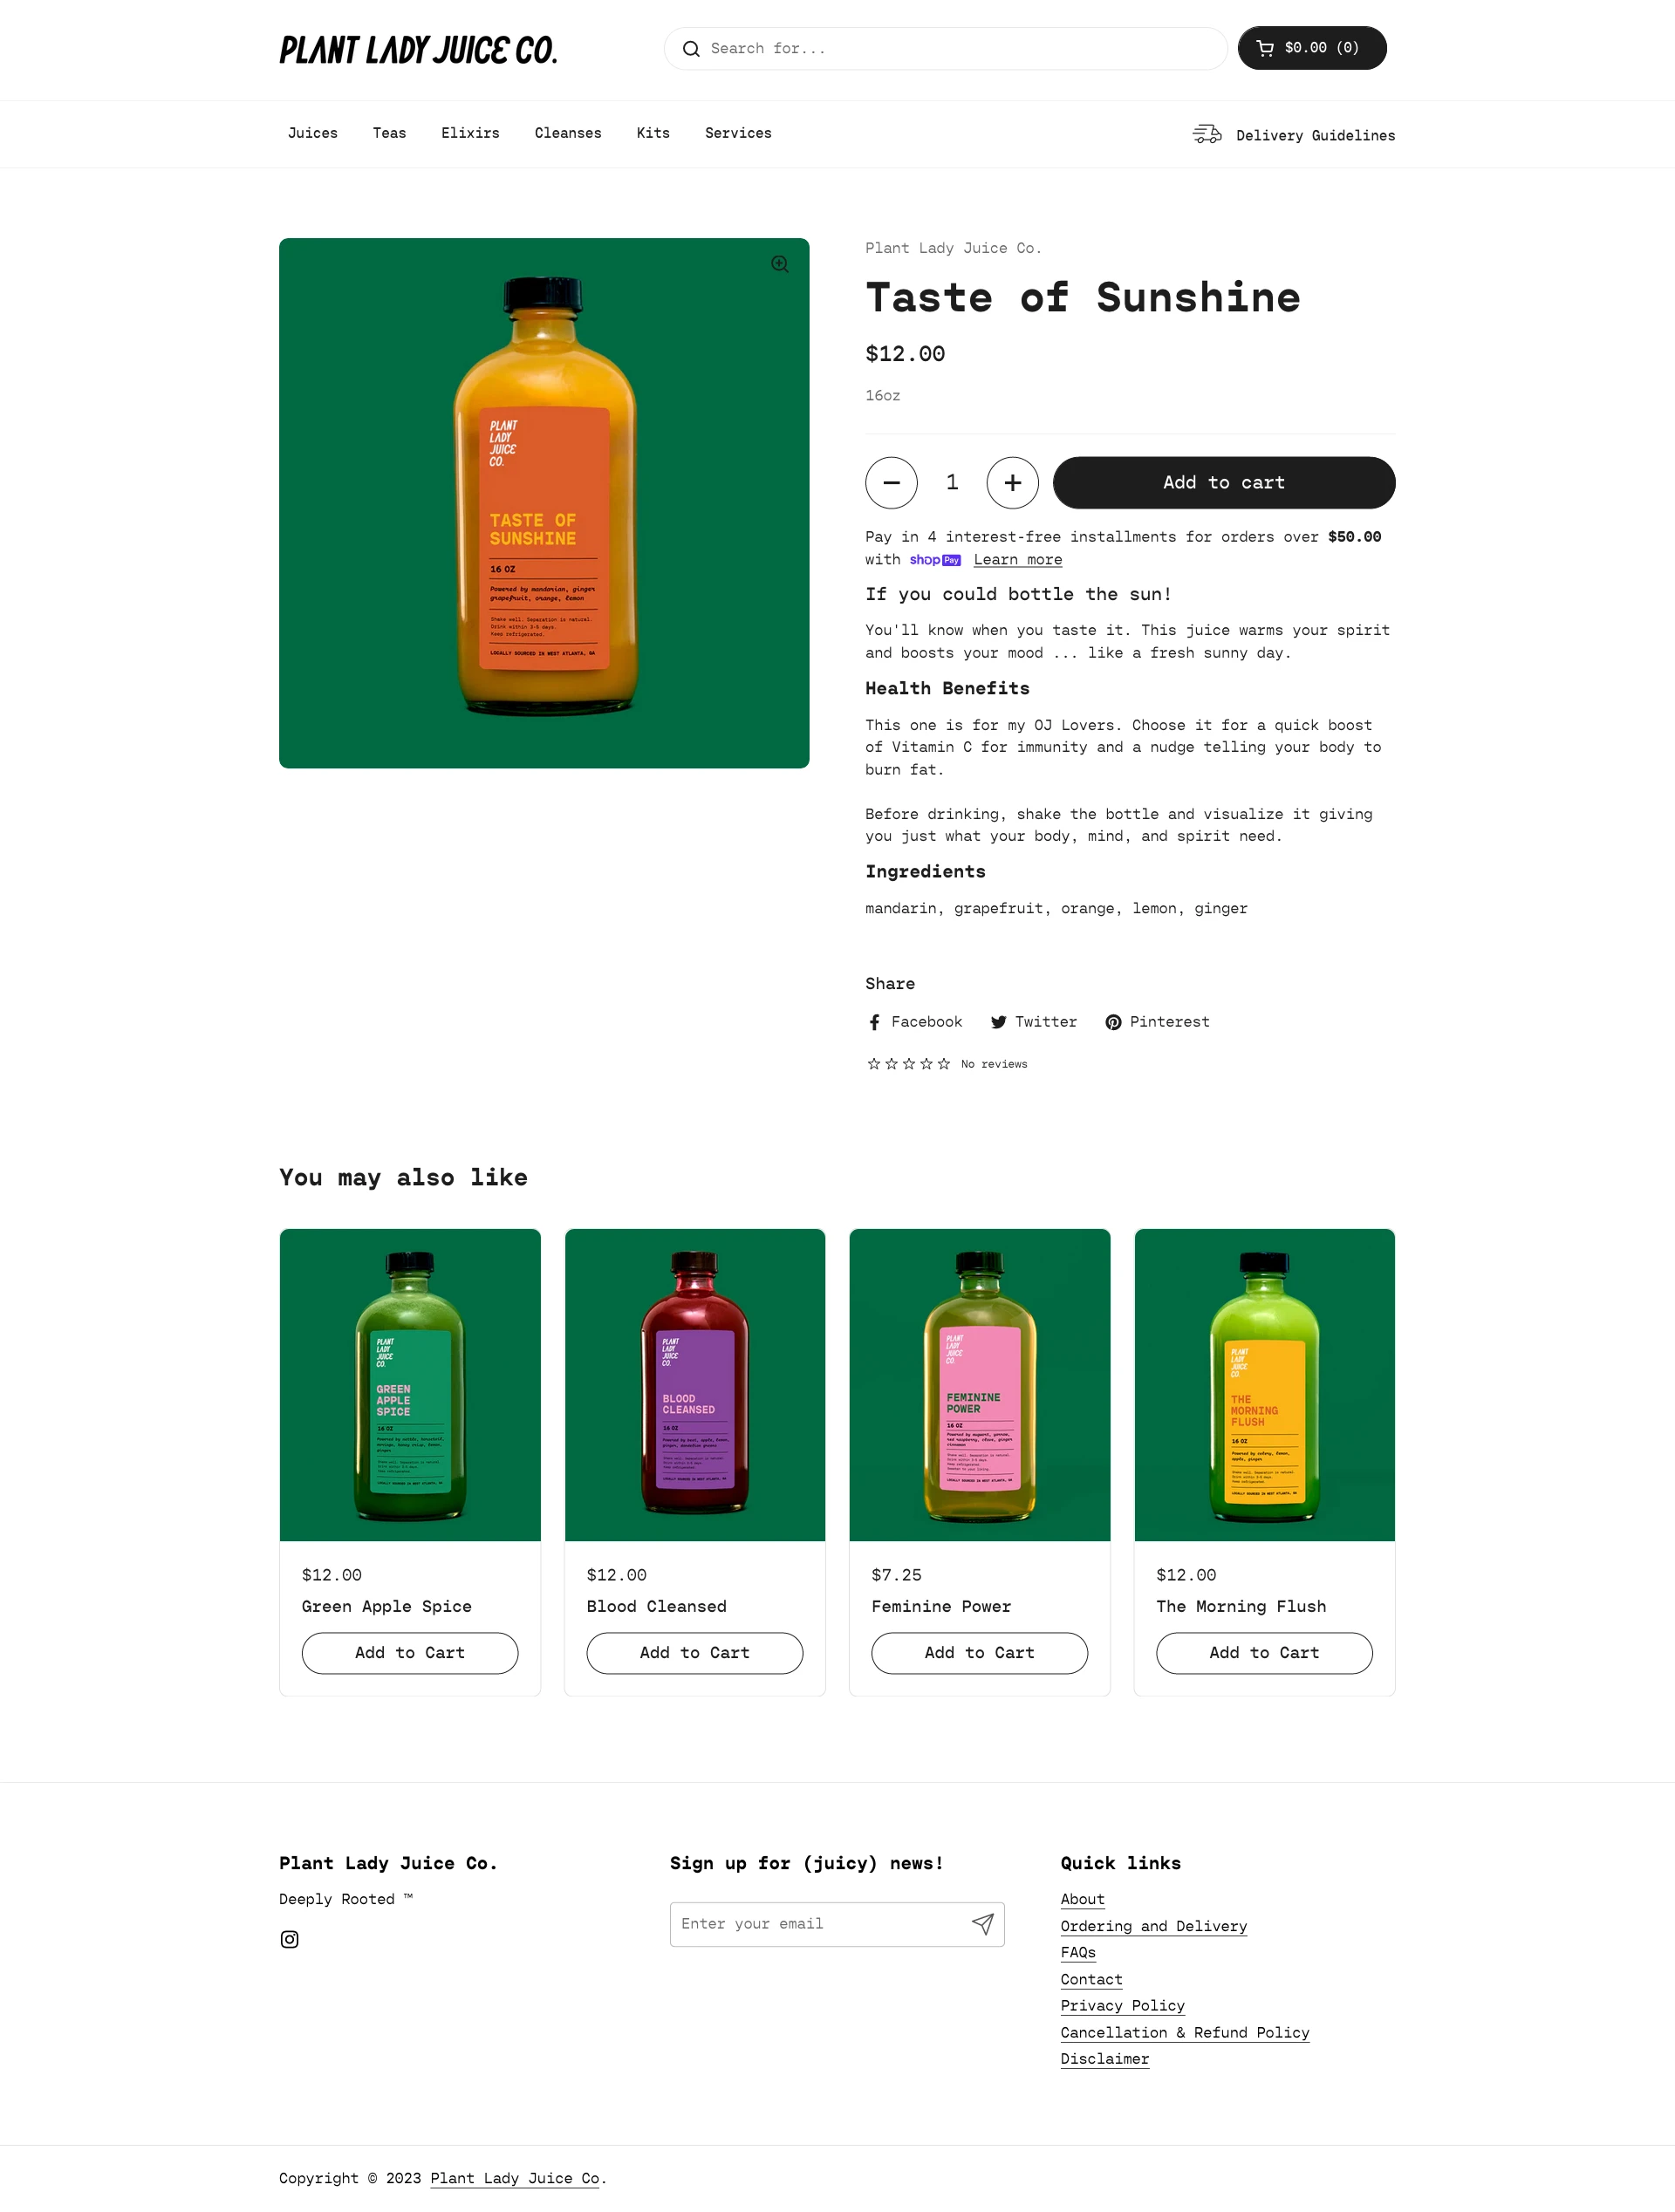 Plant Lady Juice Co Landing Page Example: Plant Lady Juice Co. sources product ingredients from our company garden and network of Georgia farmers. In addition to our libations, we provide wellness services, including our signature Wholistic Consultation.